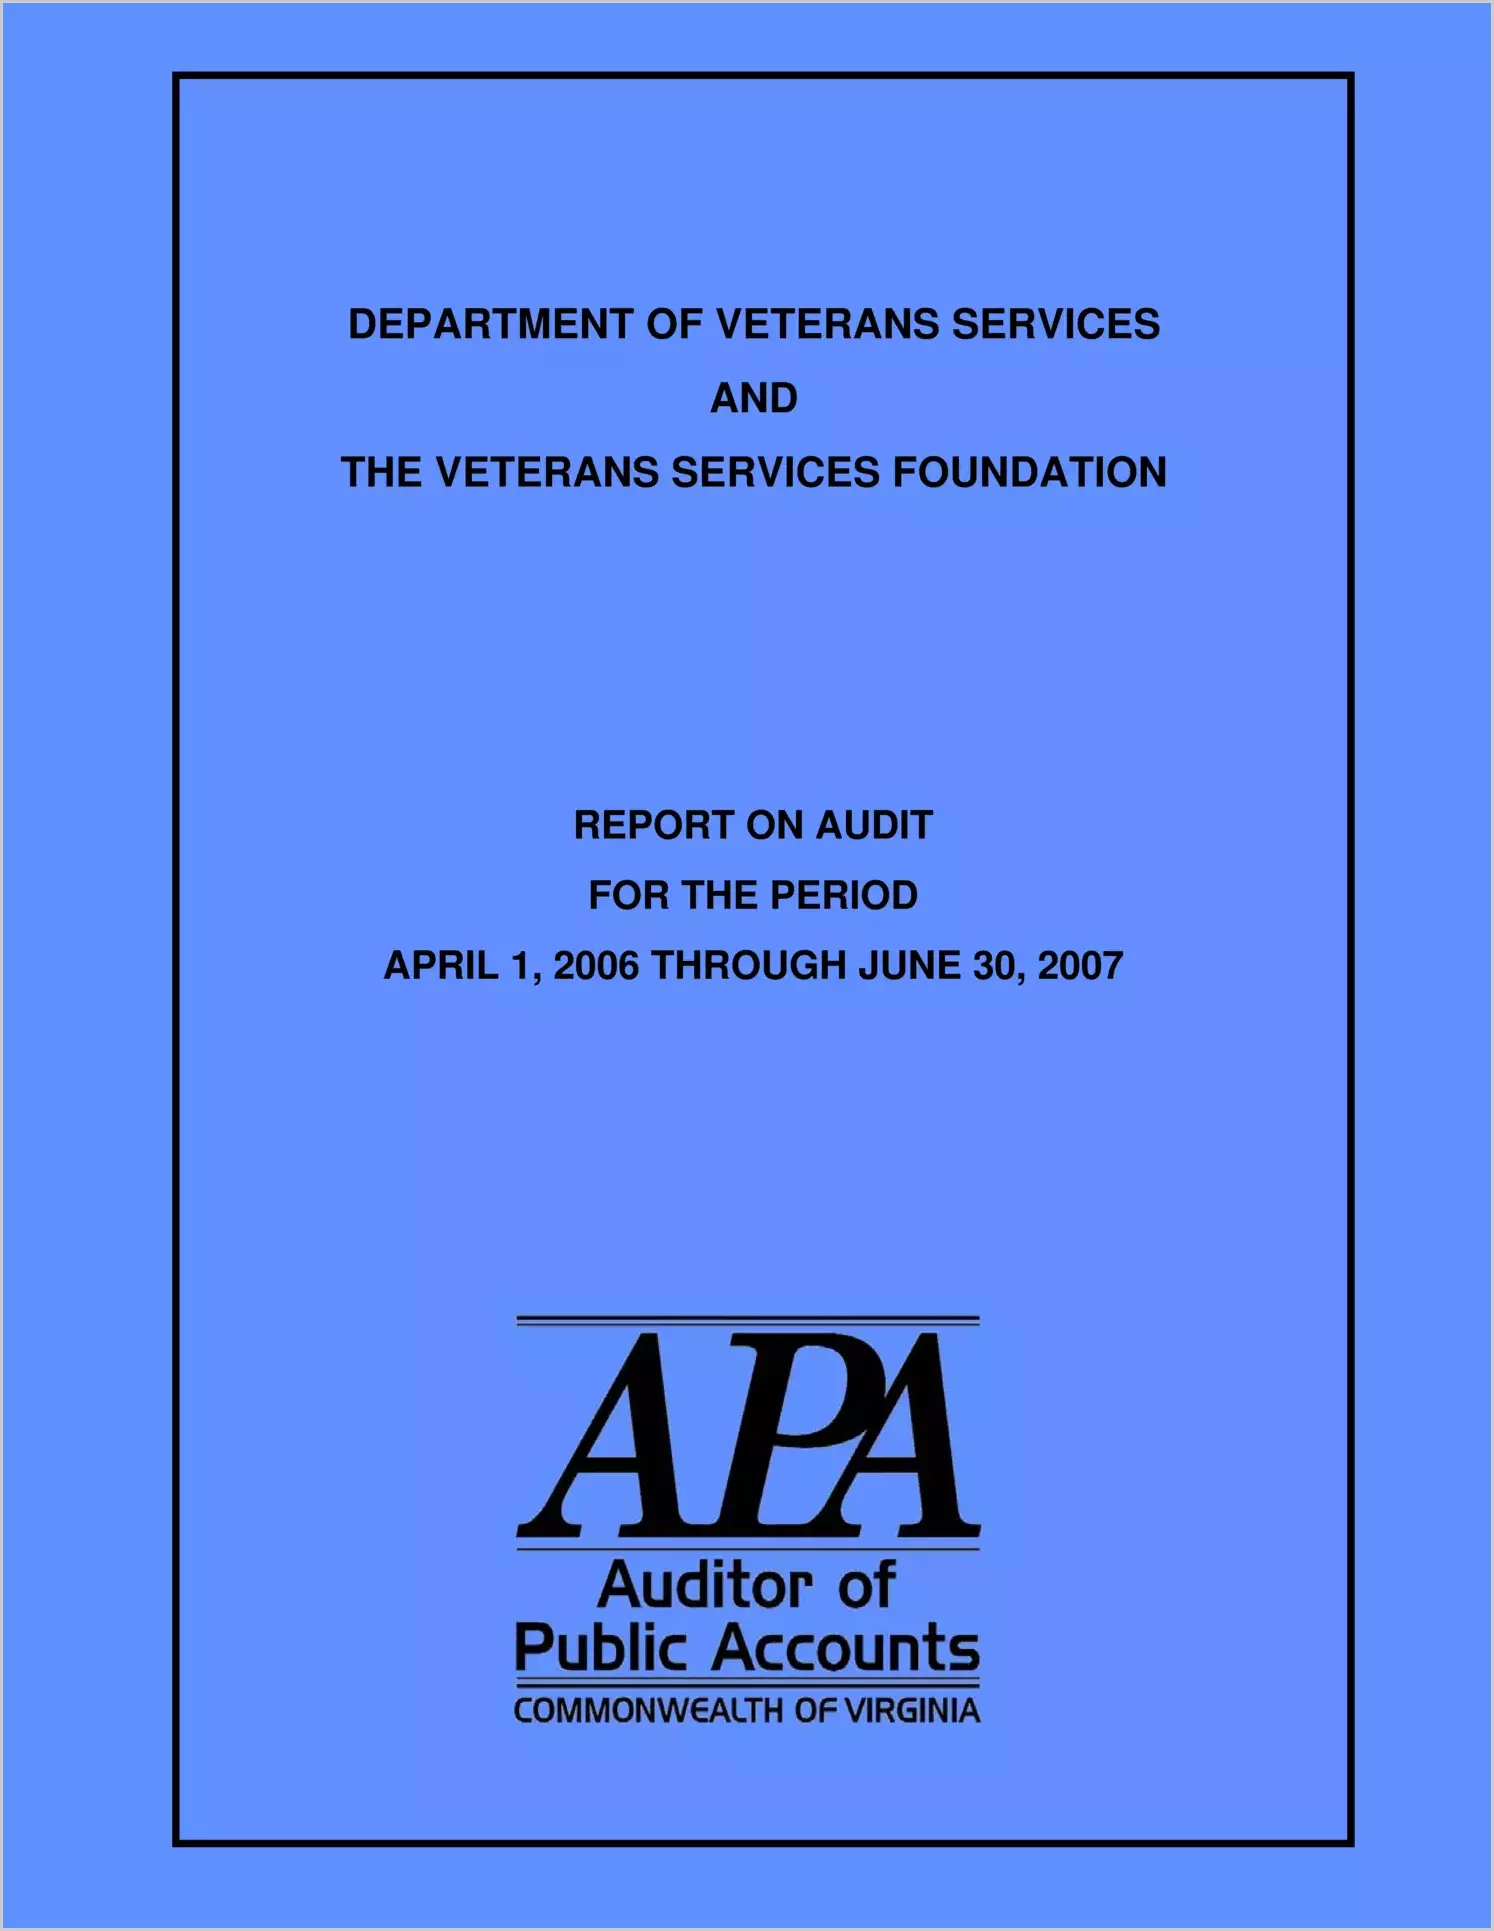 Department of Veterans Services and the Veterans Services Foundation for the period April 1, 2006 through June 30, 2007